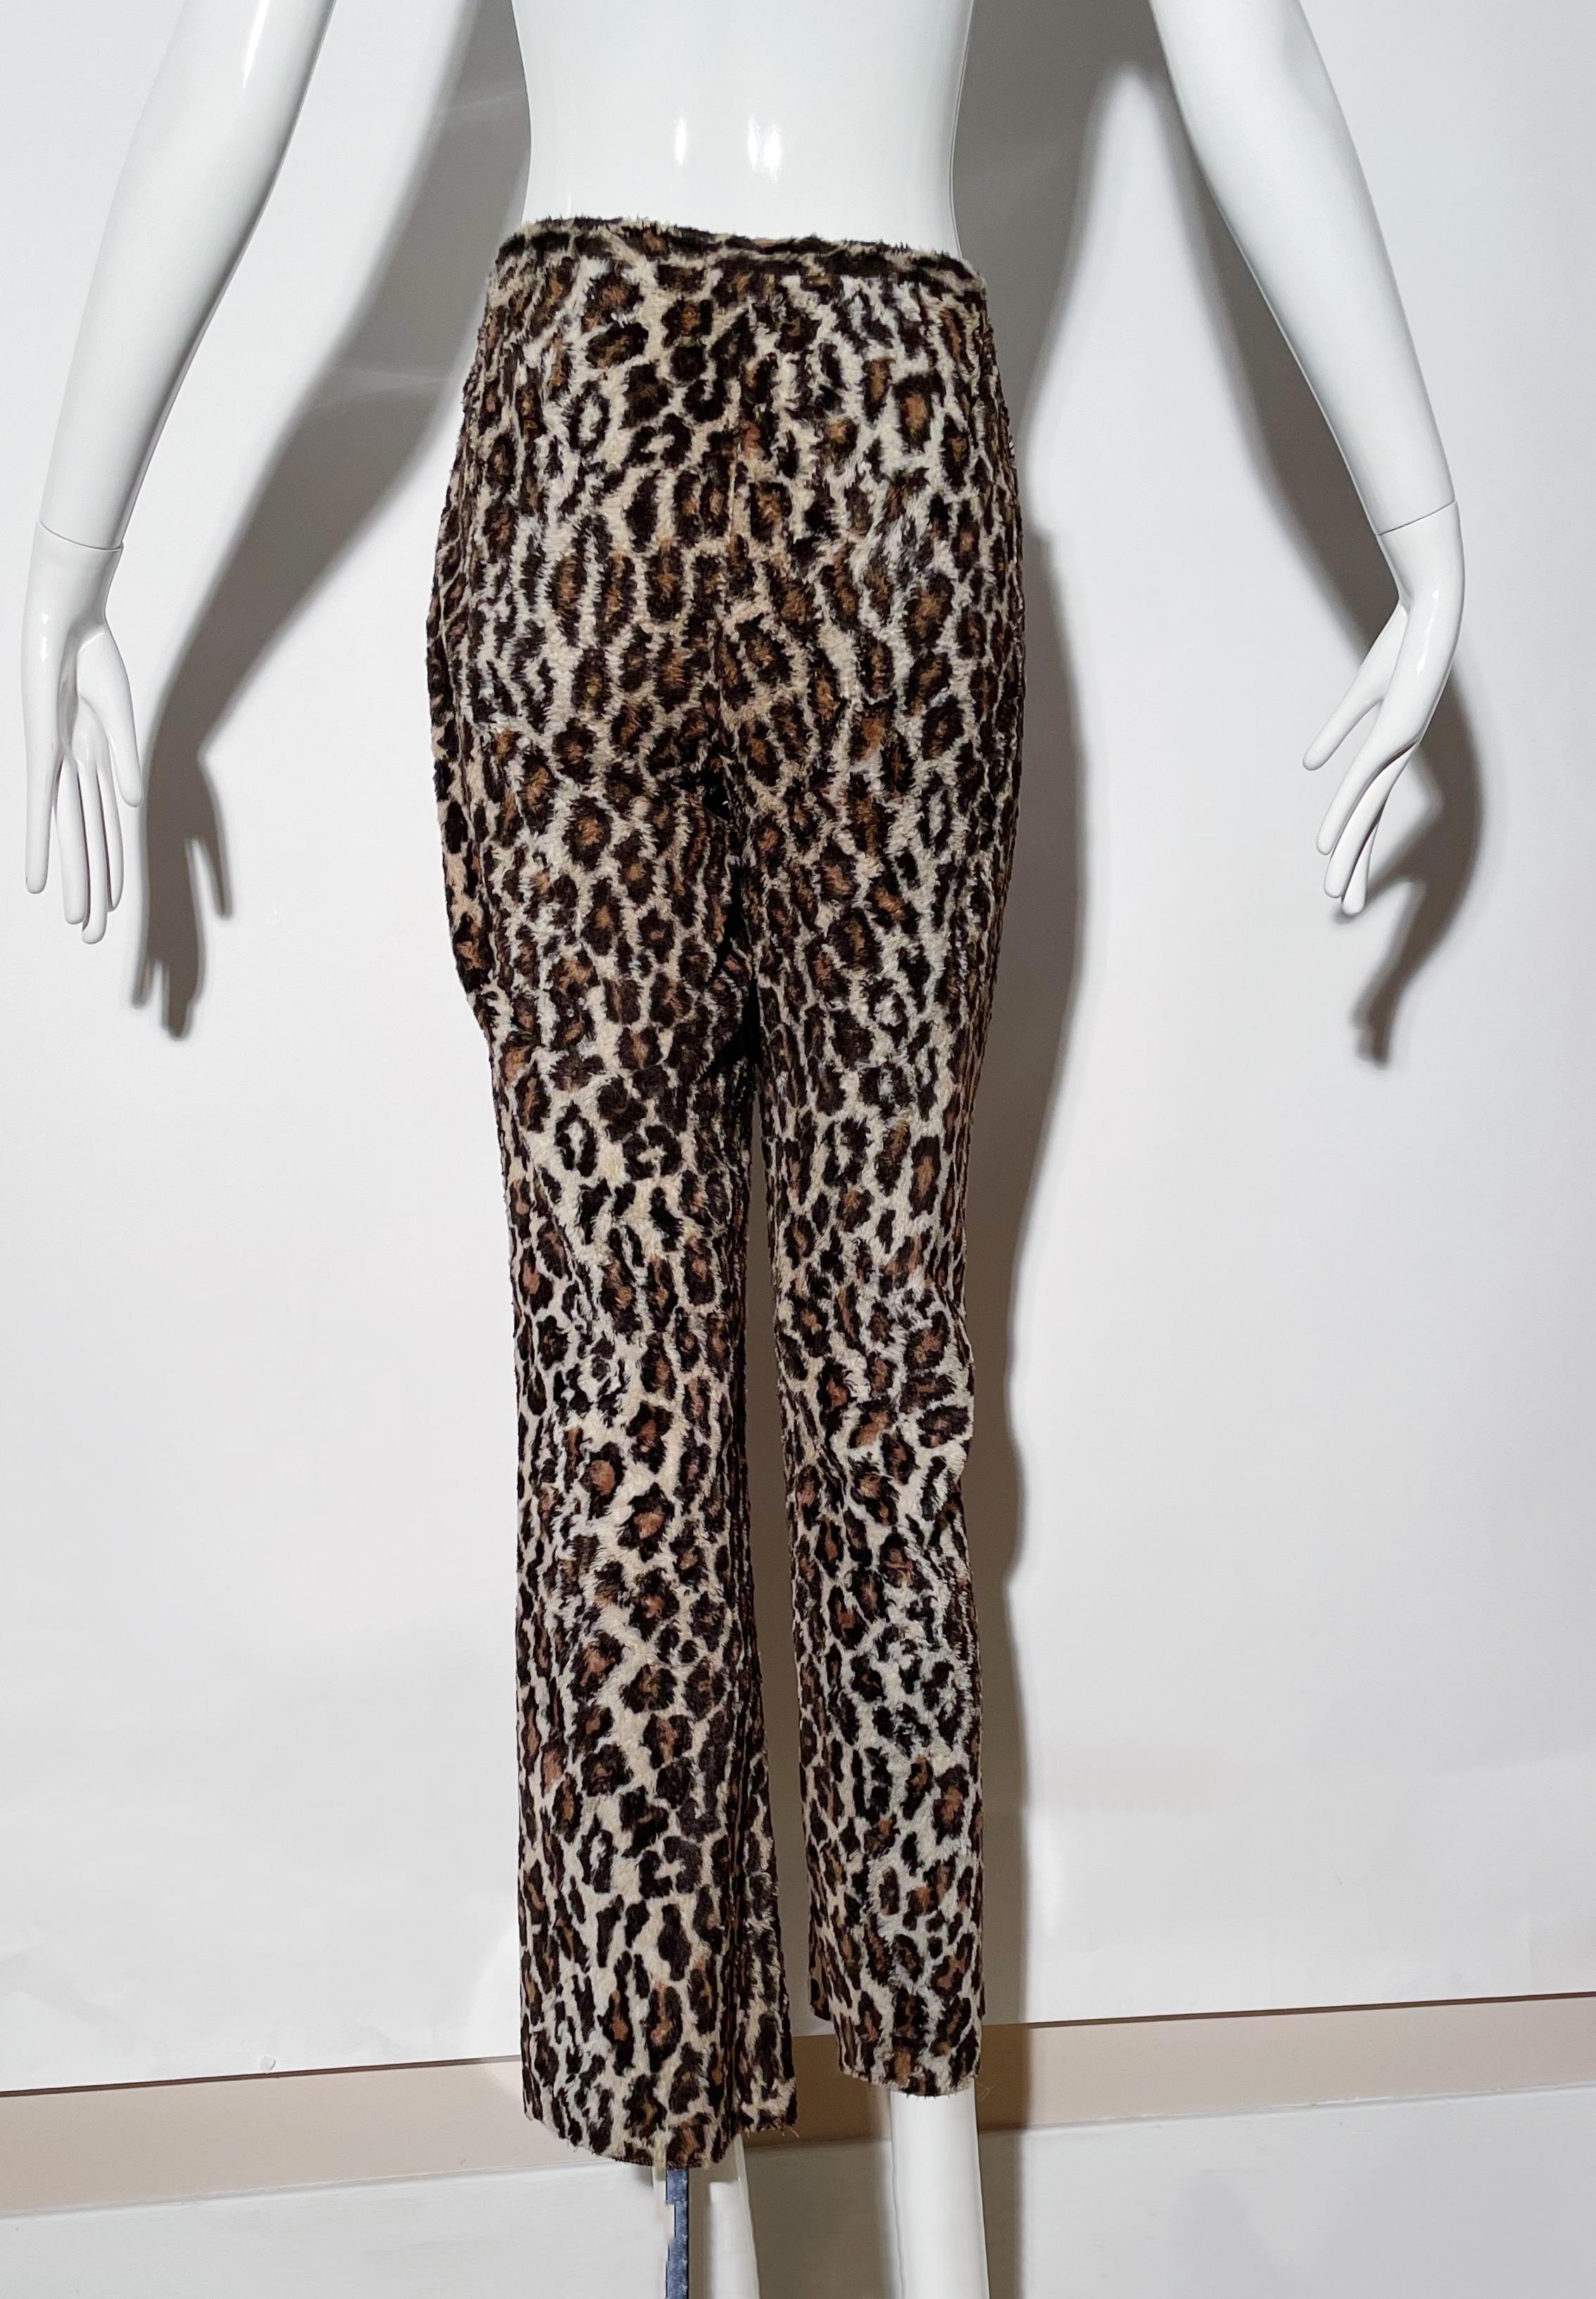 Dolce & Gabbana Fuzzy Leopard Print Pants  In Excellent Condition For Sale In Los Angeles, CA